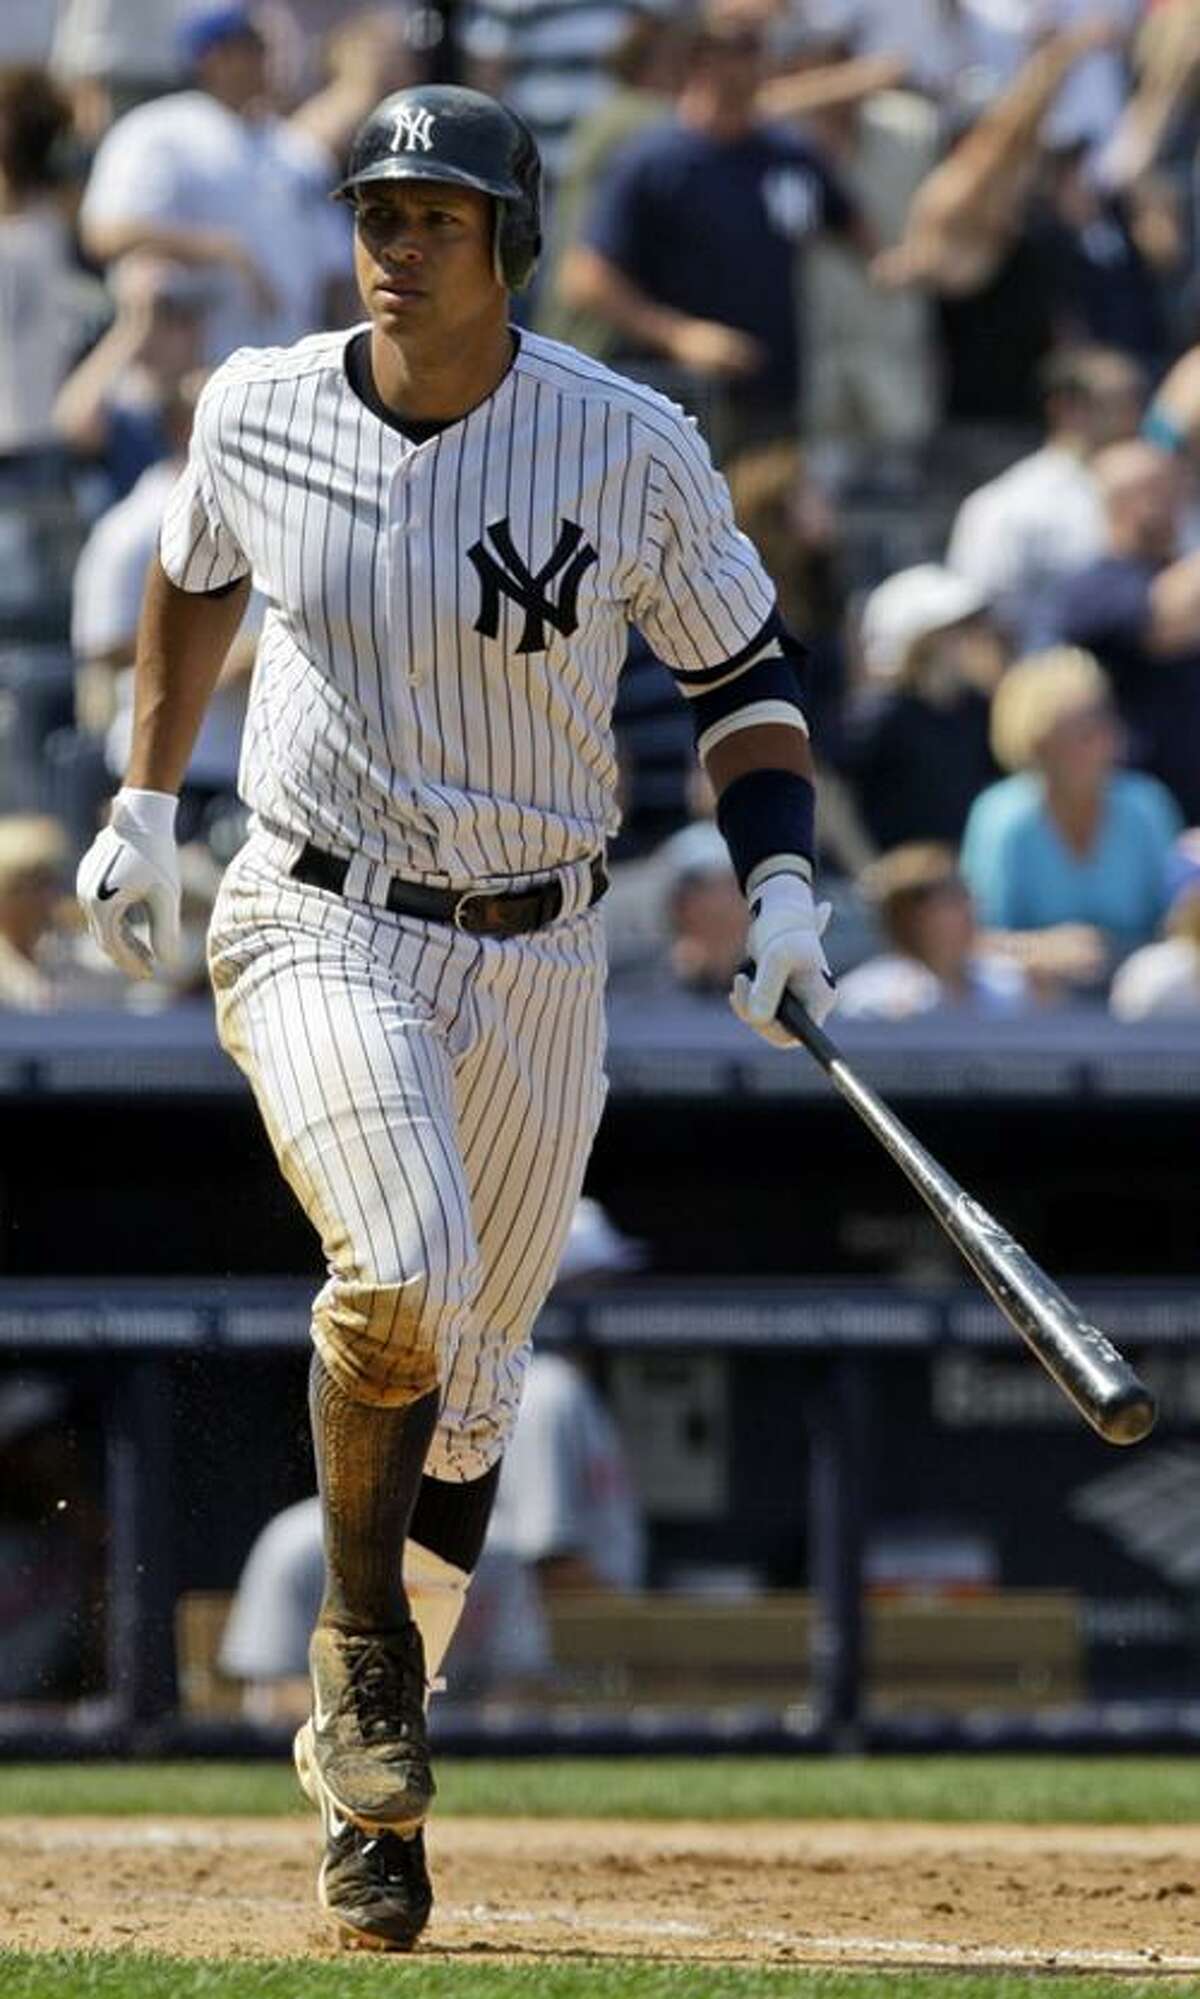 Alex Rodriguez takes a look into the Yankees' dugout after hitting a grand slam in the seventh inning of New York's 11-2 win over Cleveland on Monday. (Associated Press)